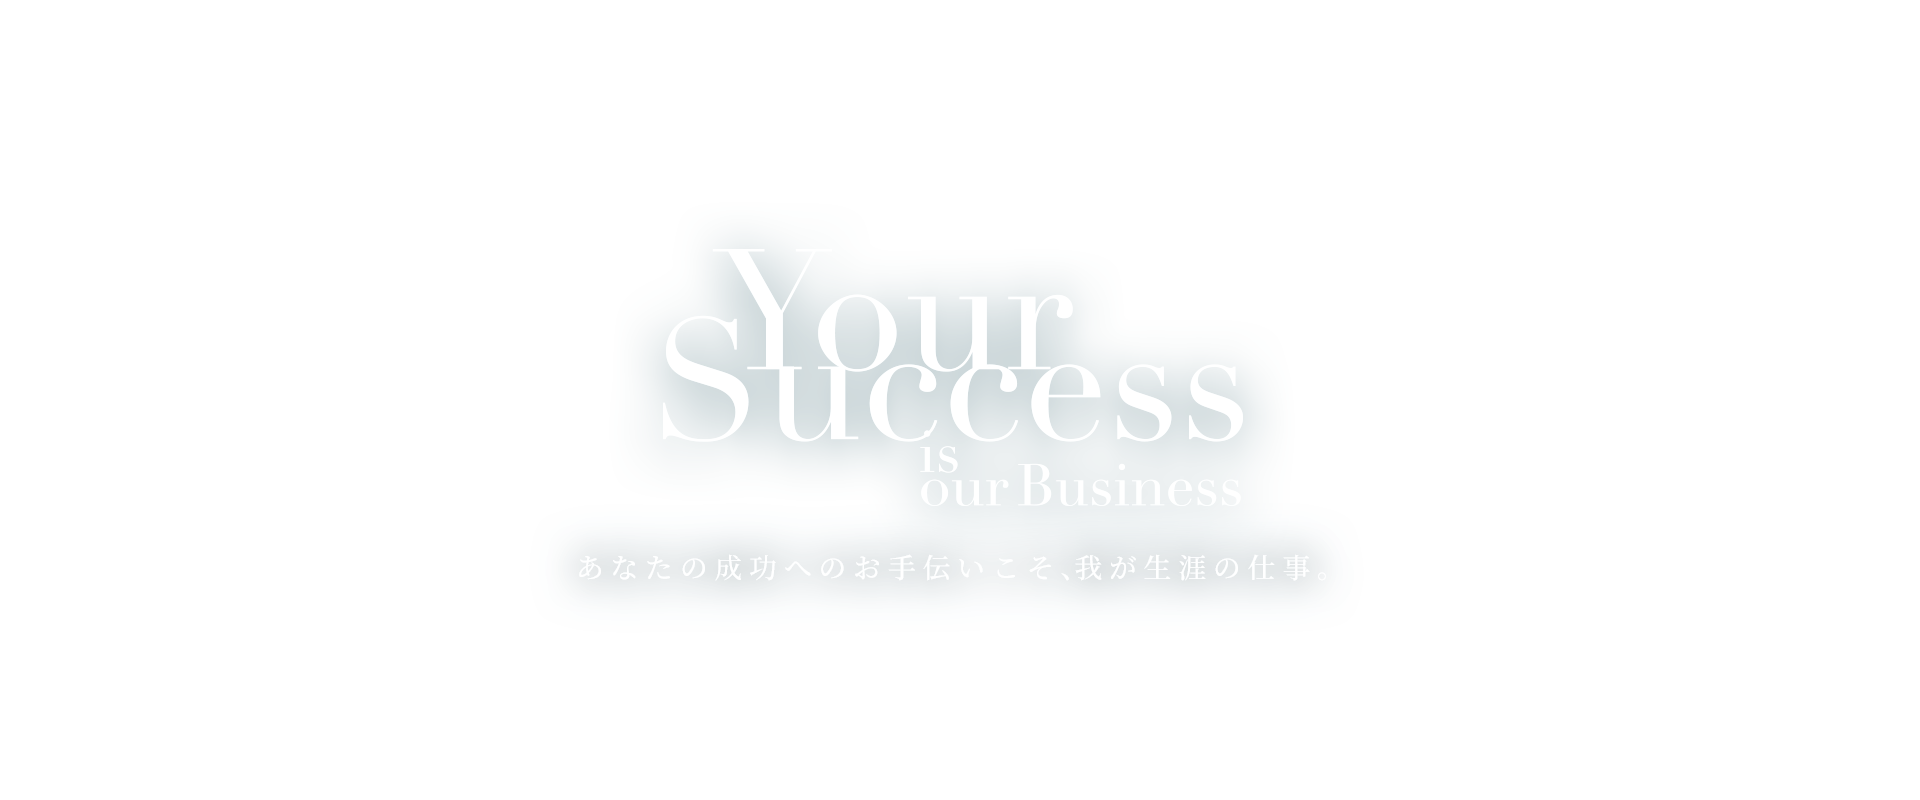 Your success is our business.